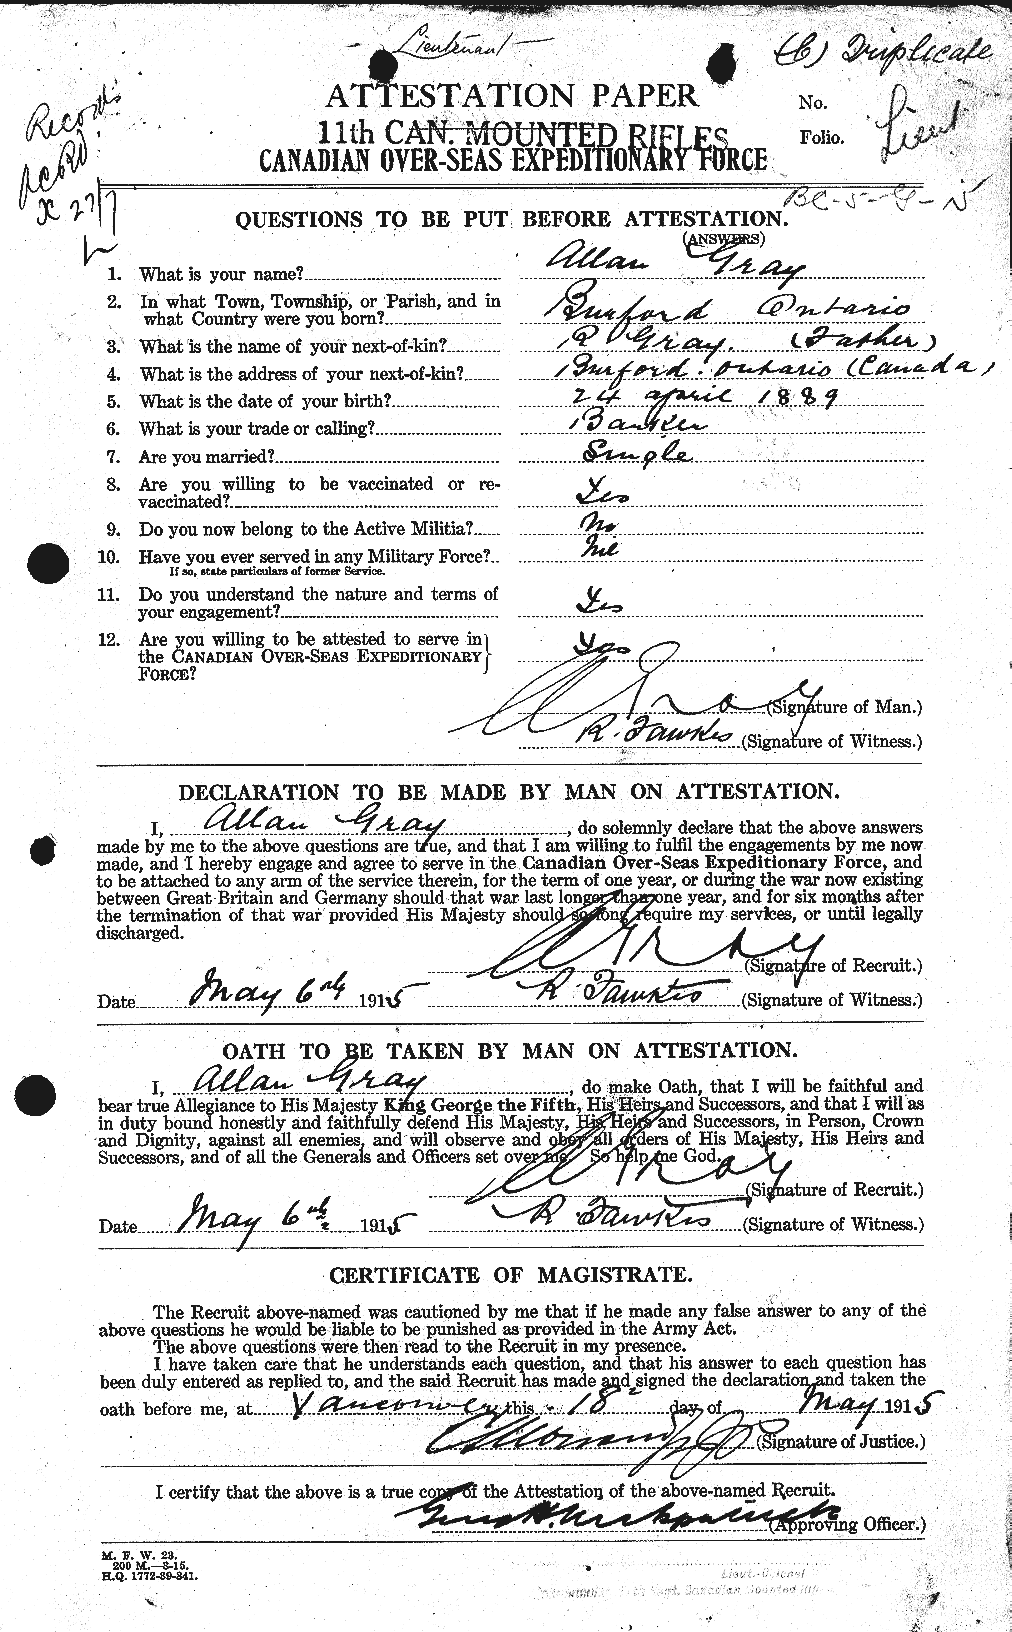 Personnel Records of the First World War - CEF 361343a